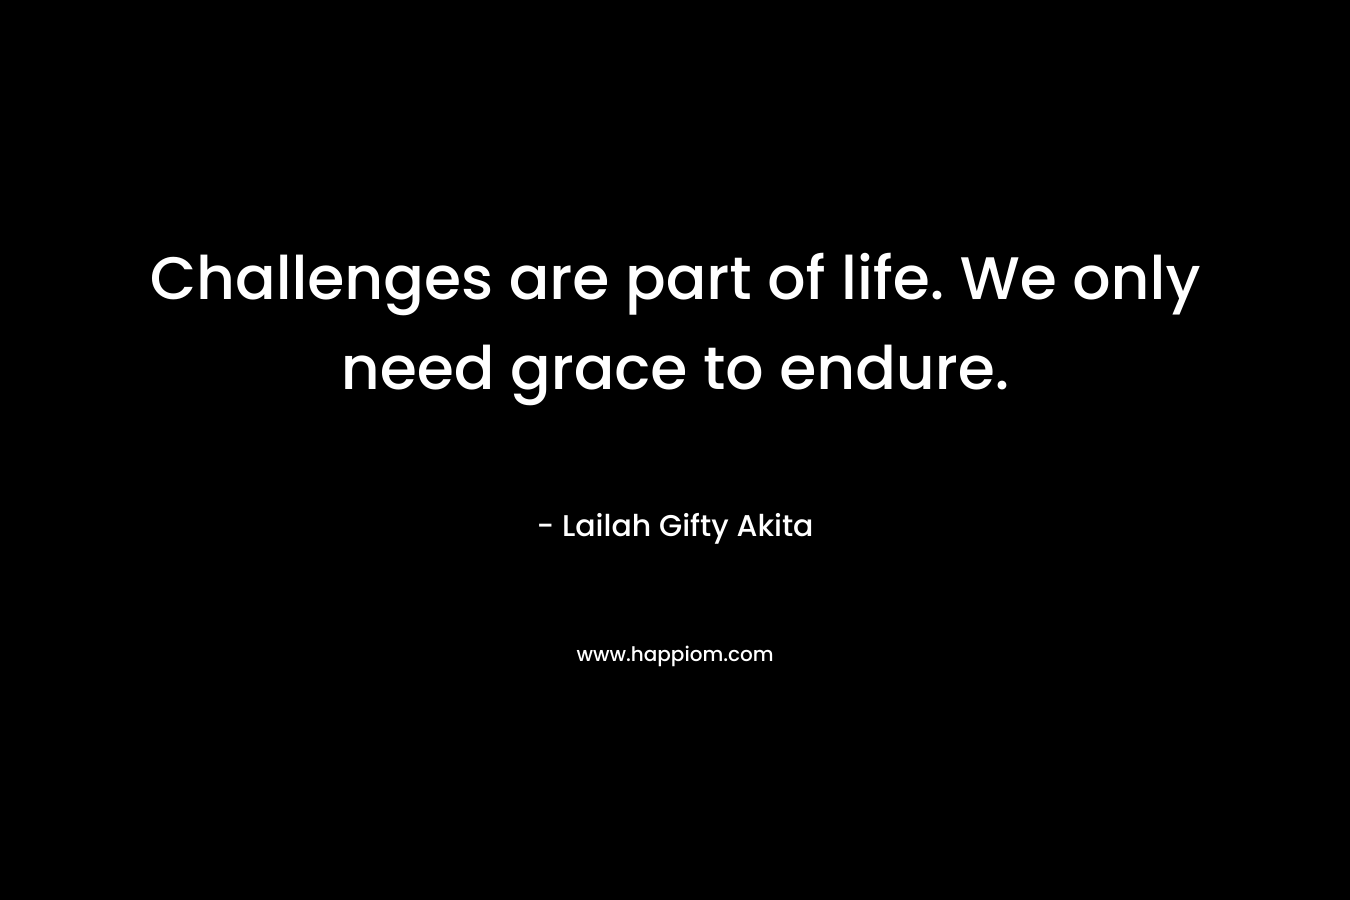 Challenges are part of life. We only need grace to endure.